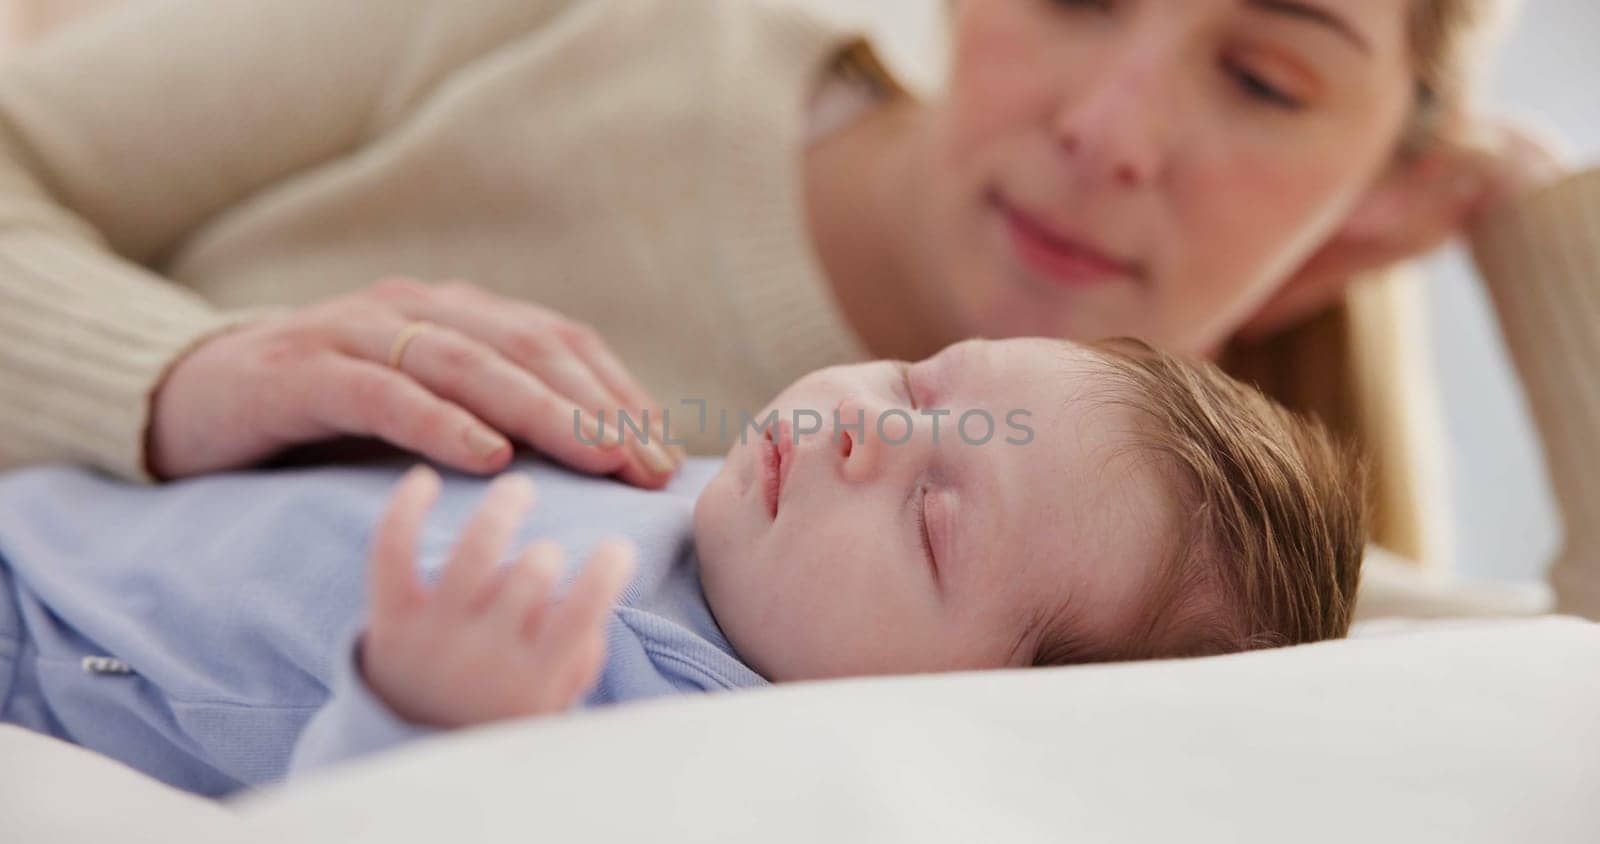 Family, love and a mama on the bed with her baby for sleep, rest or bonding together in a home. Children, bedroom and a single mom in an apartment with her newborn infant to relax for care or growth.